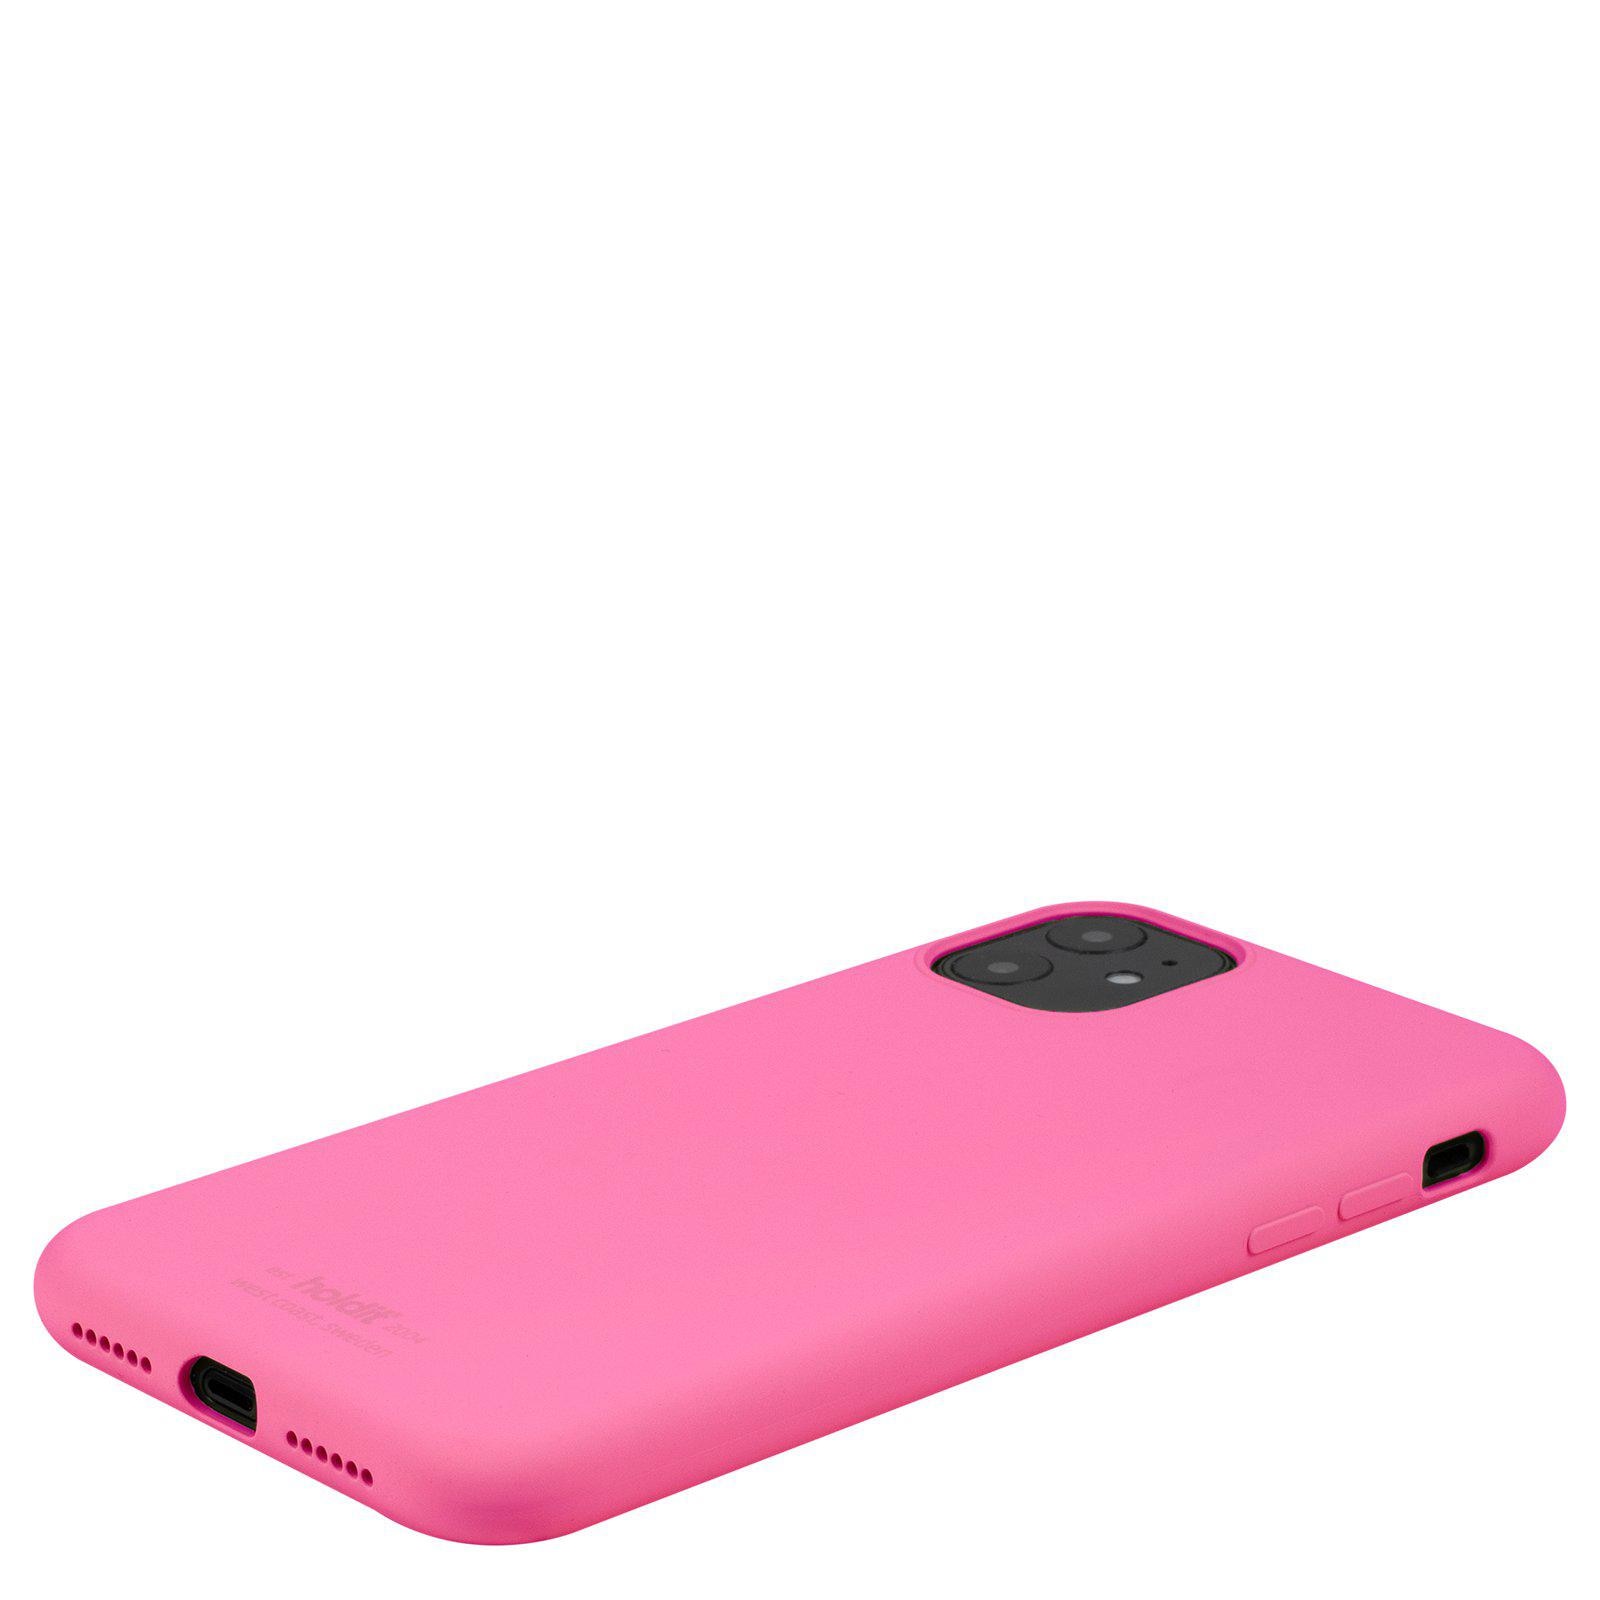 Coque en silicone iPhone XR, Bright Pink